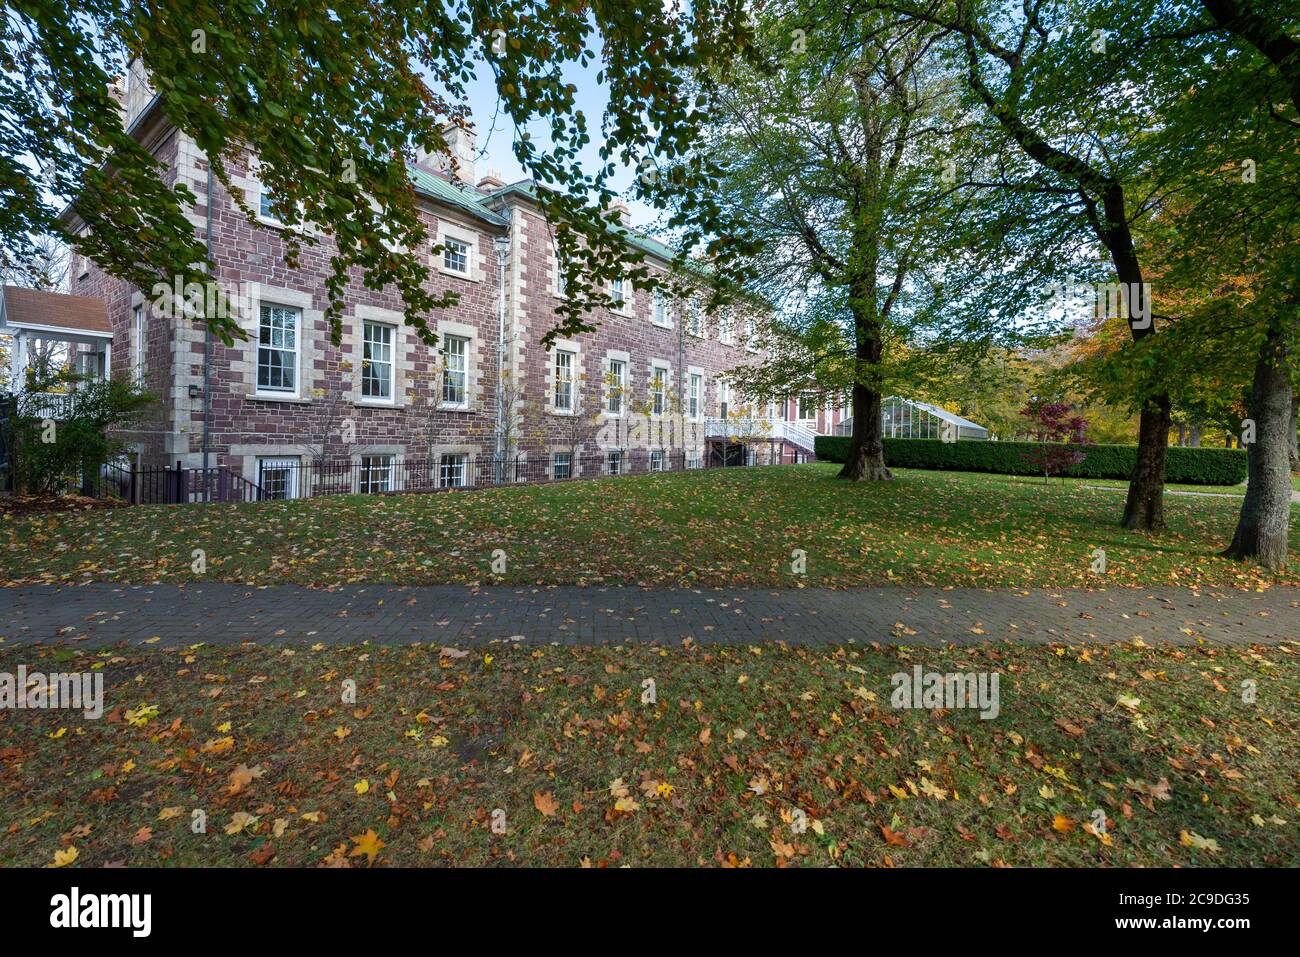 A garden view of green grass, red leaves on the ground and tall maple trees against the blue sky. There's a vintage brick building in the background. Stock Photo